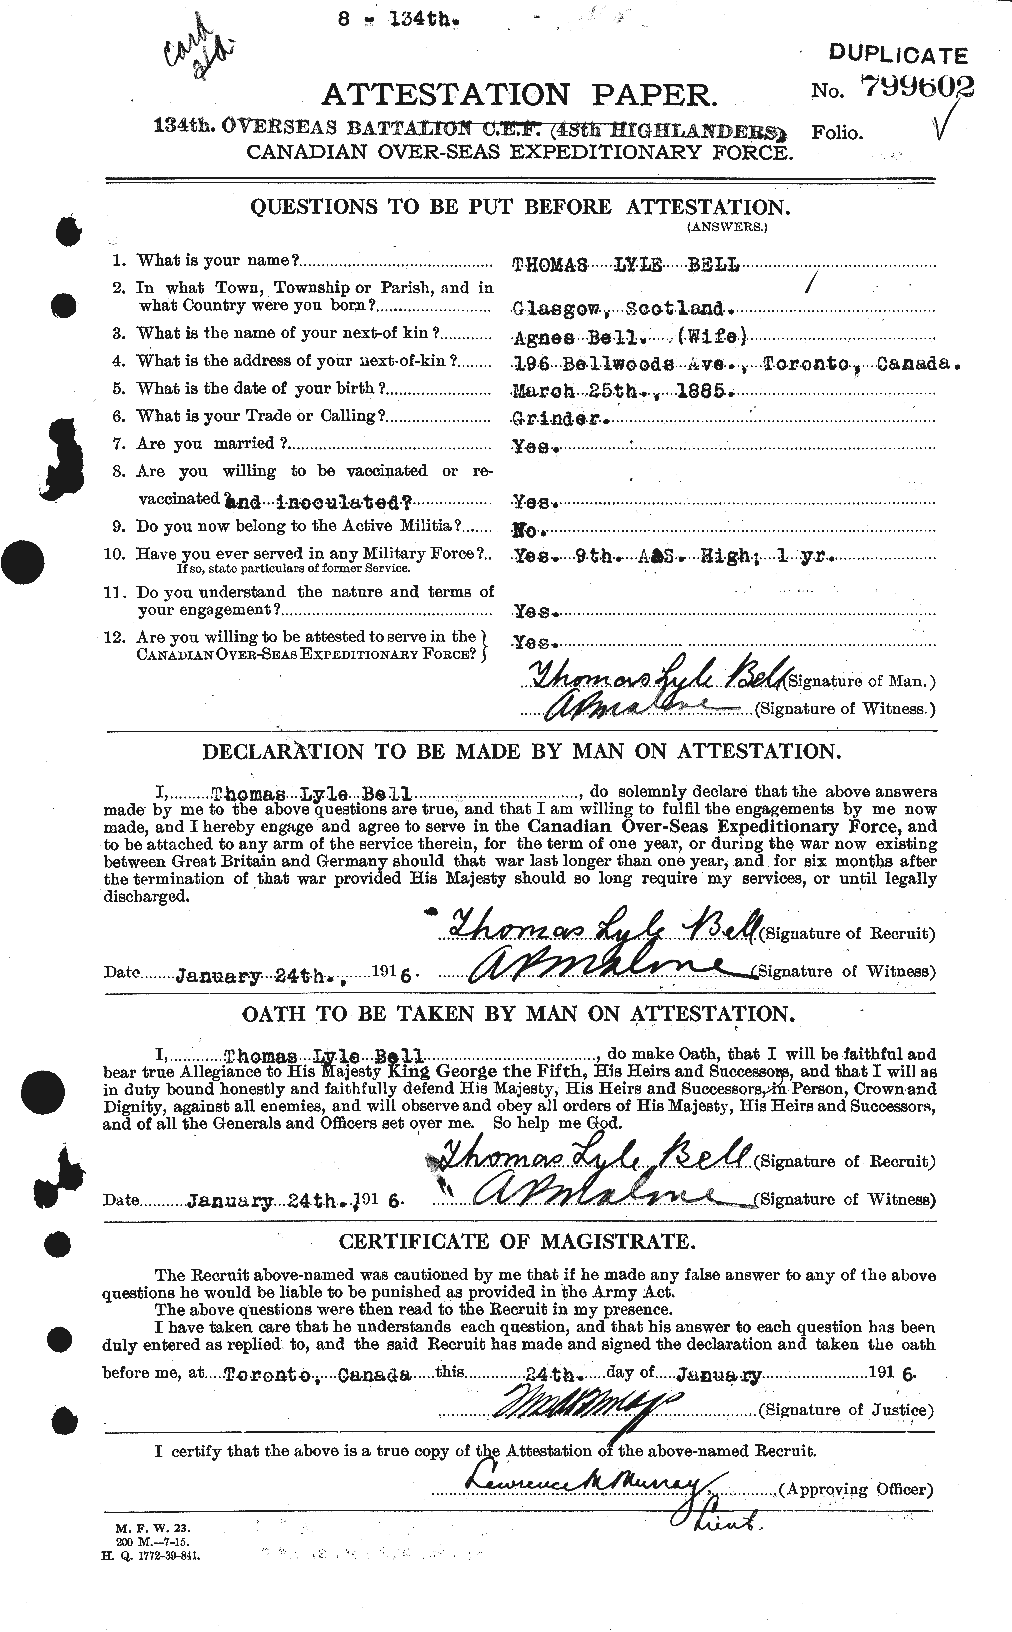 Personnel Records of the First World War - CEF 234765a